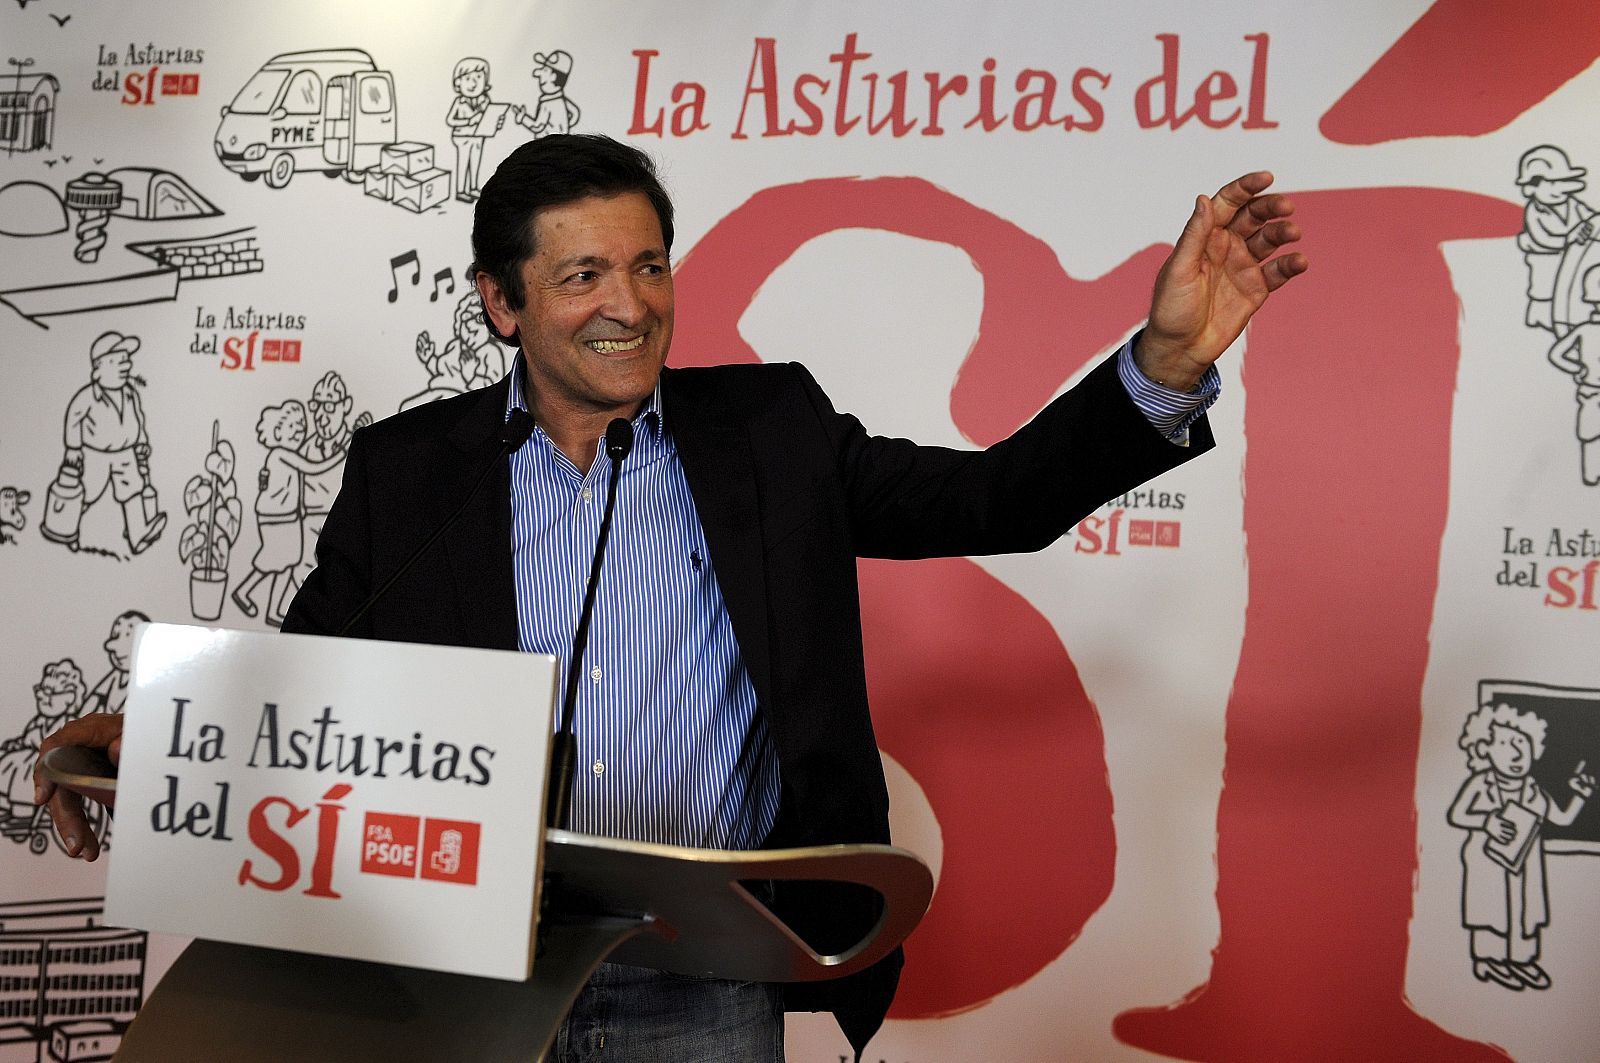 Javier Fernandez, president of the regional Government of Asturias and candidate of Spain's Socialist Party (PSOE), smiles during a news conference where he announced his electoral victory, in Oviedo